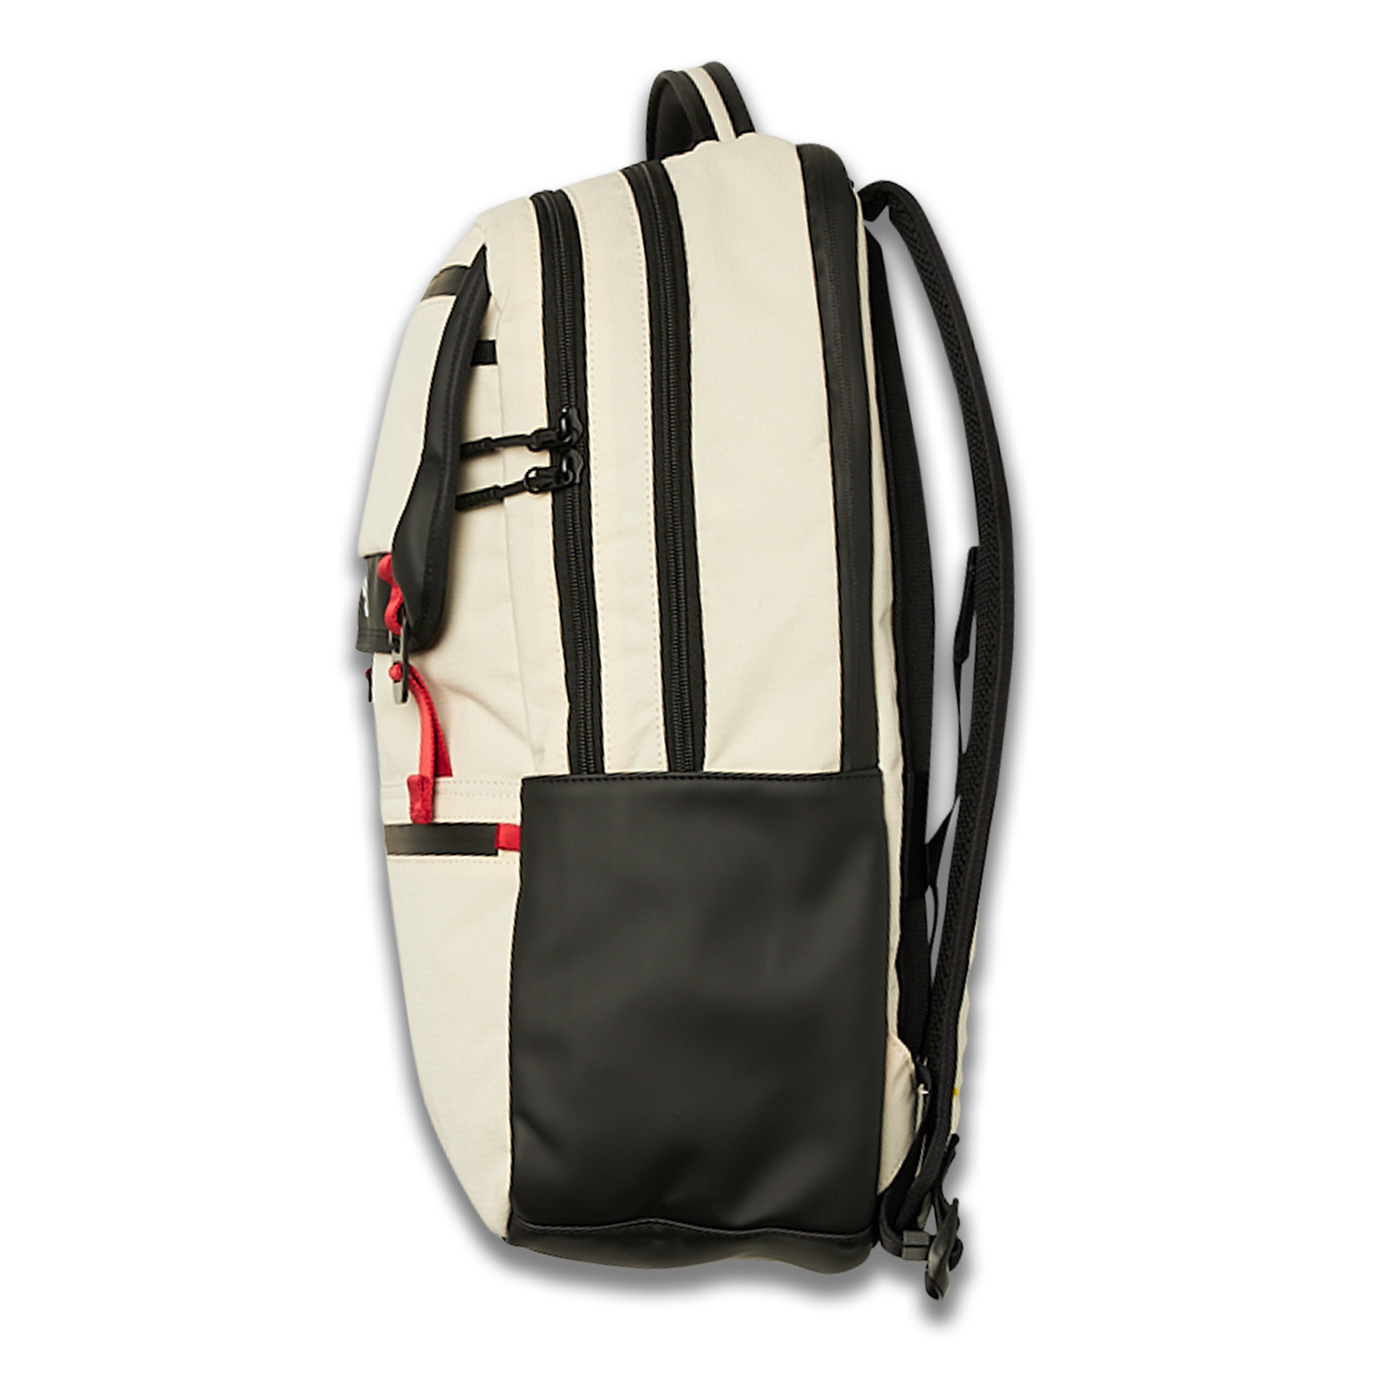 A2 Backpack R - Le Creme